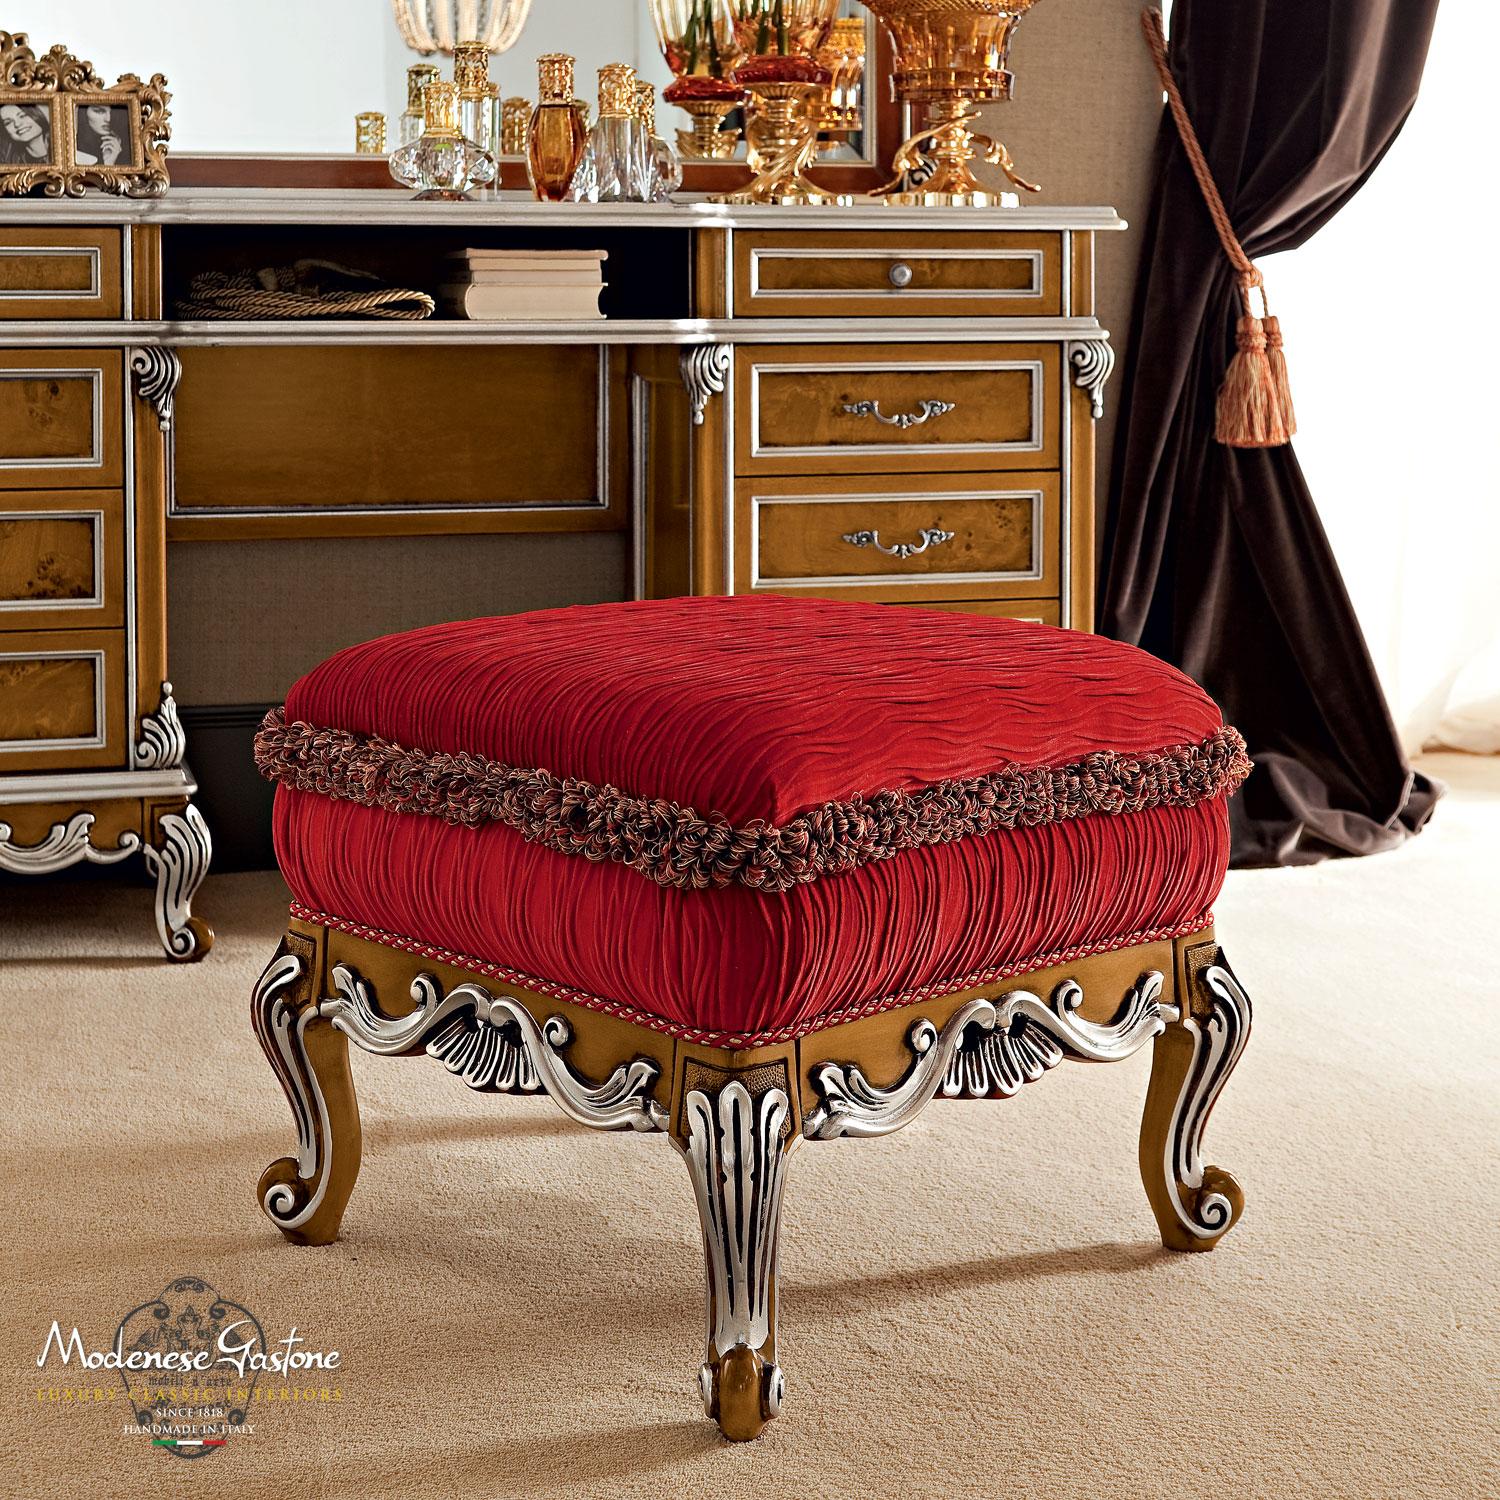 Best candidate to be paired with the matching seatings for a coherent bedroom or living atmosphere, this ottoman is a wonderfully designed and produced item by Modenese Gastone Interiors. Featuring a squared, padded seat upholstered in bright red